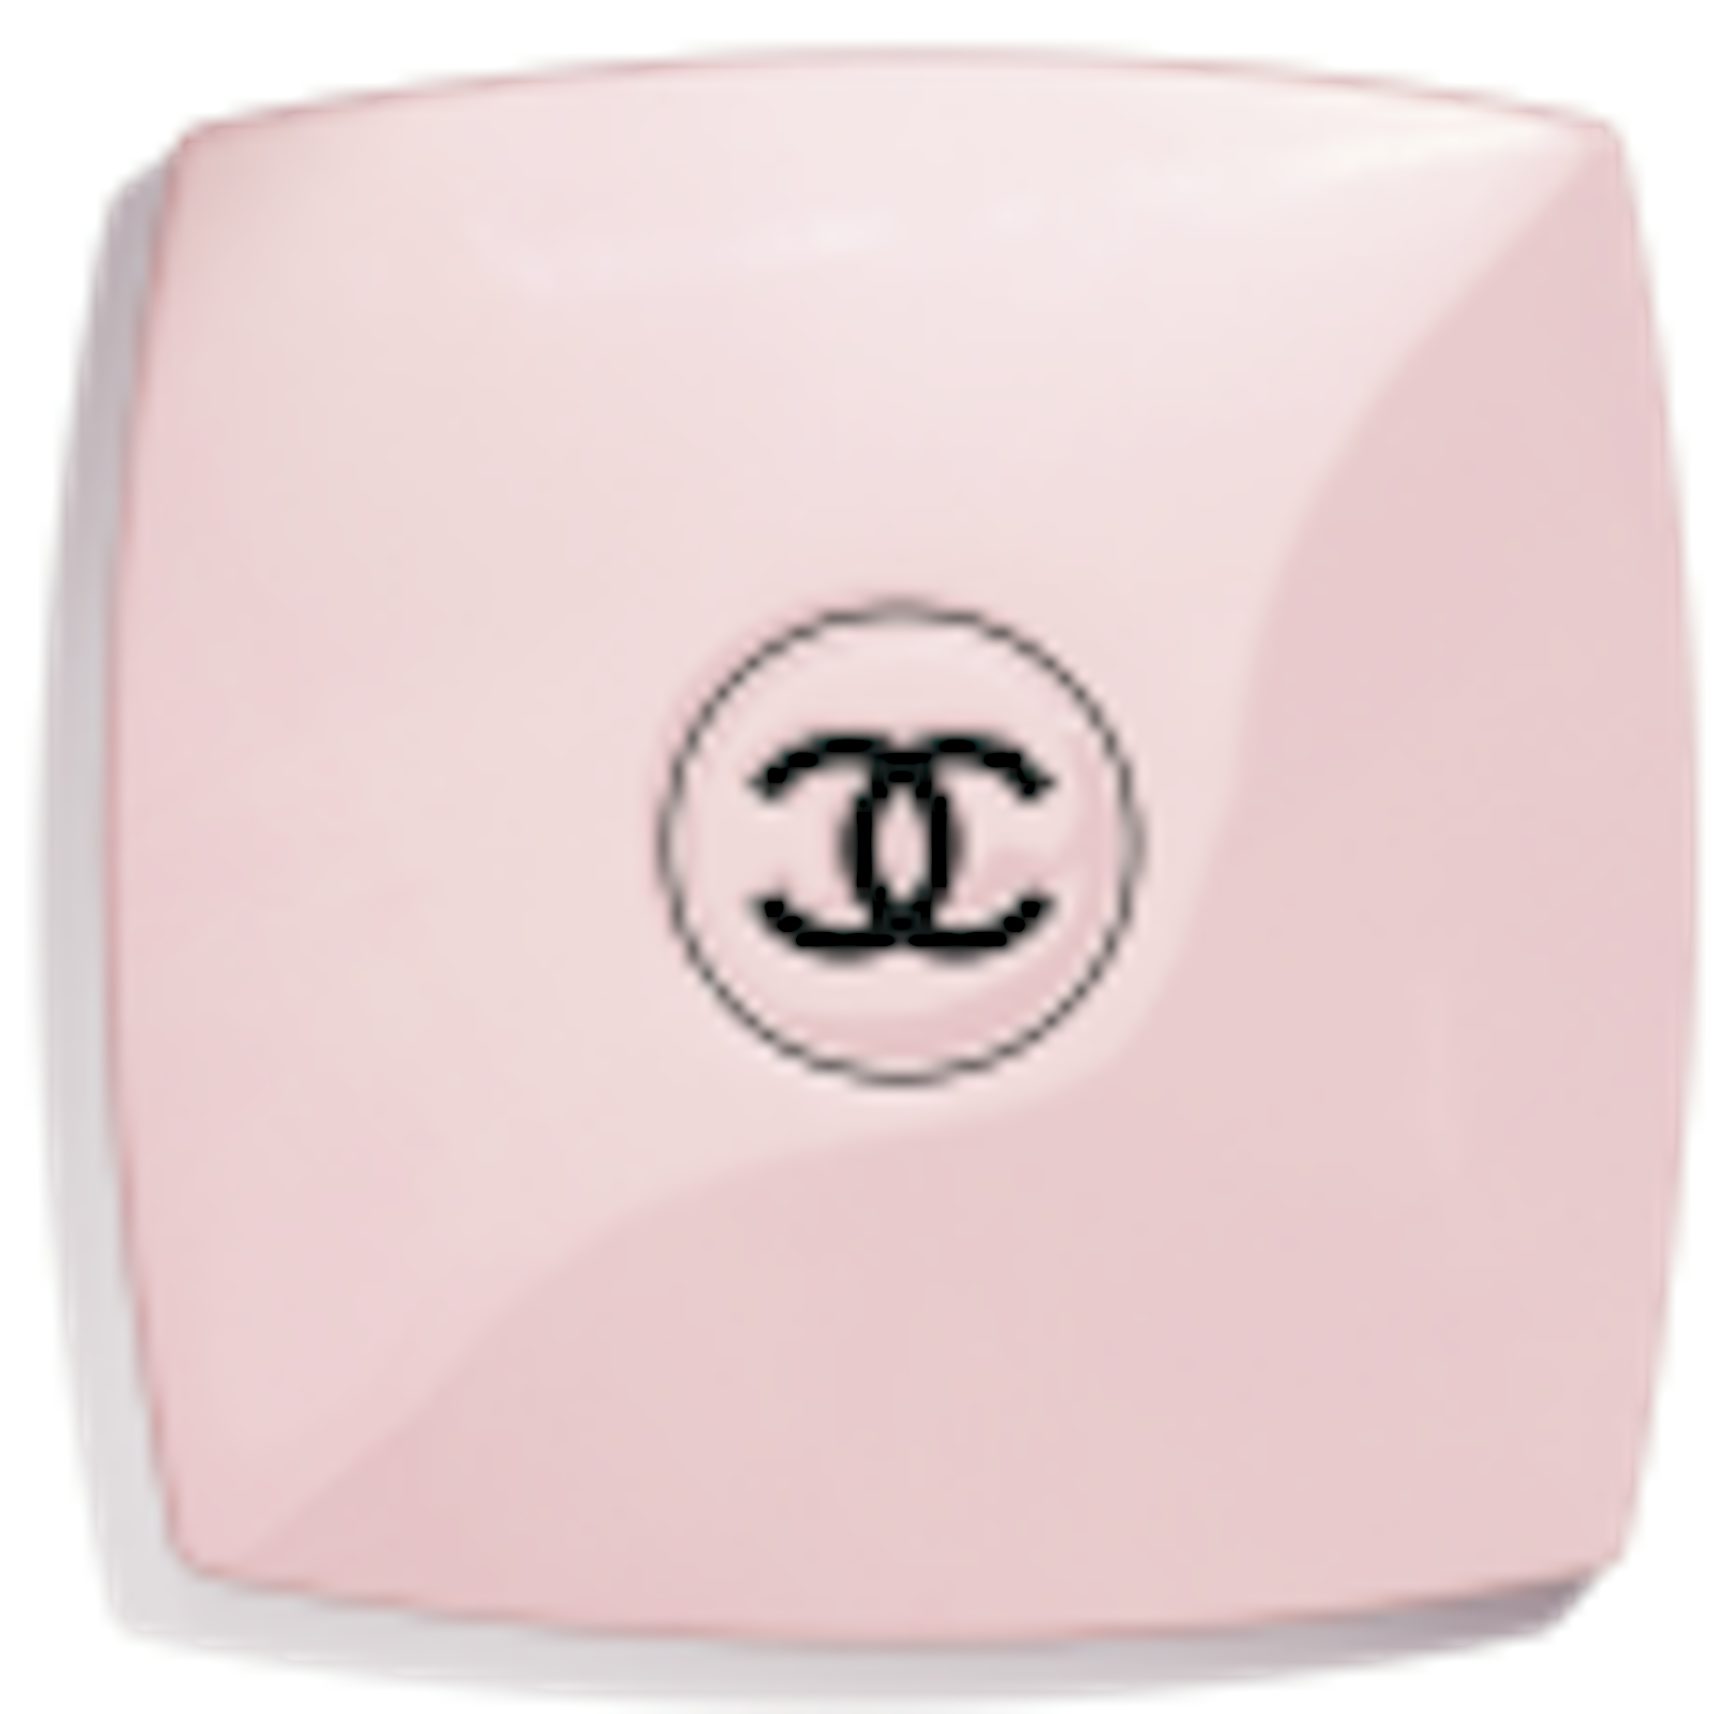 CHANEL, Other, Chanel Limited Edition Ballerina Mirror